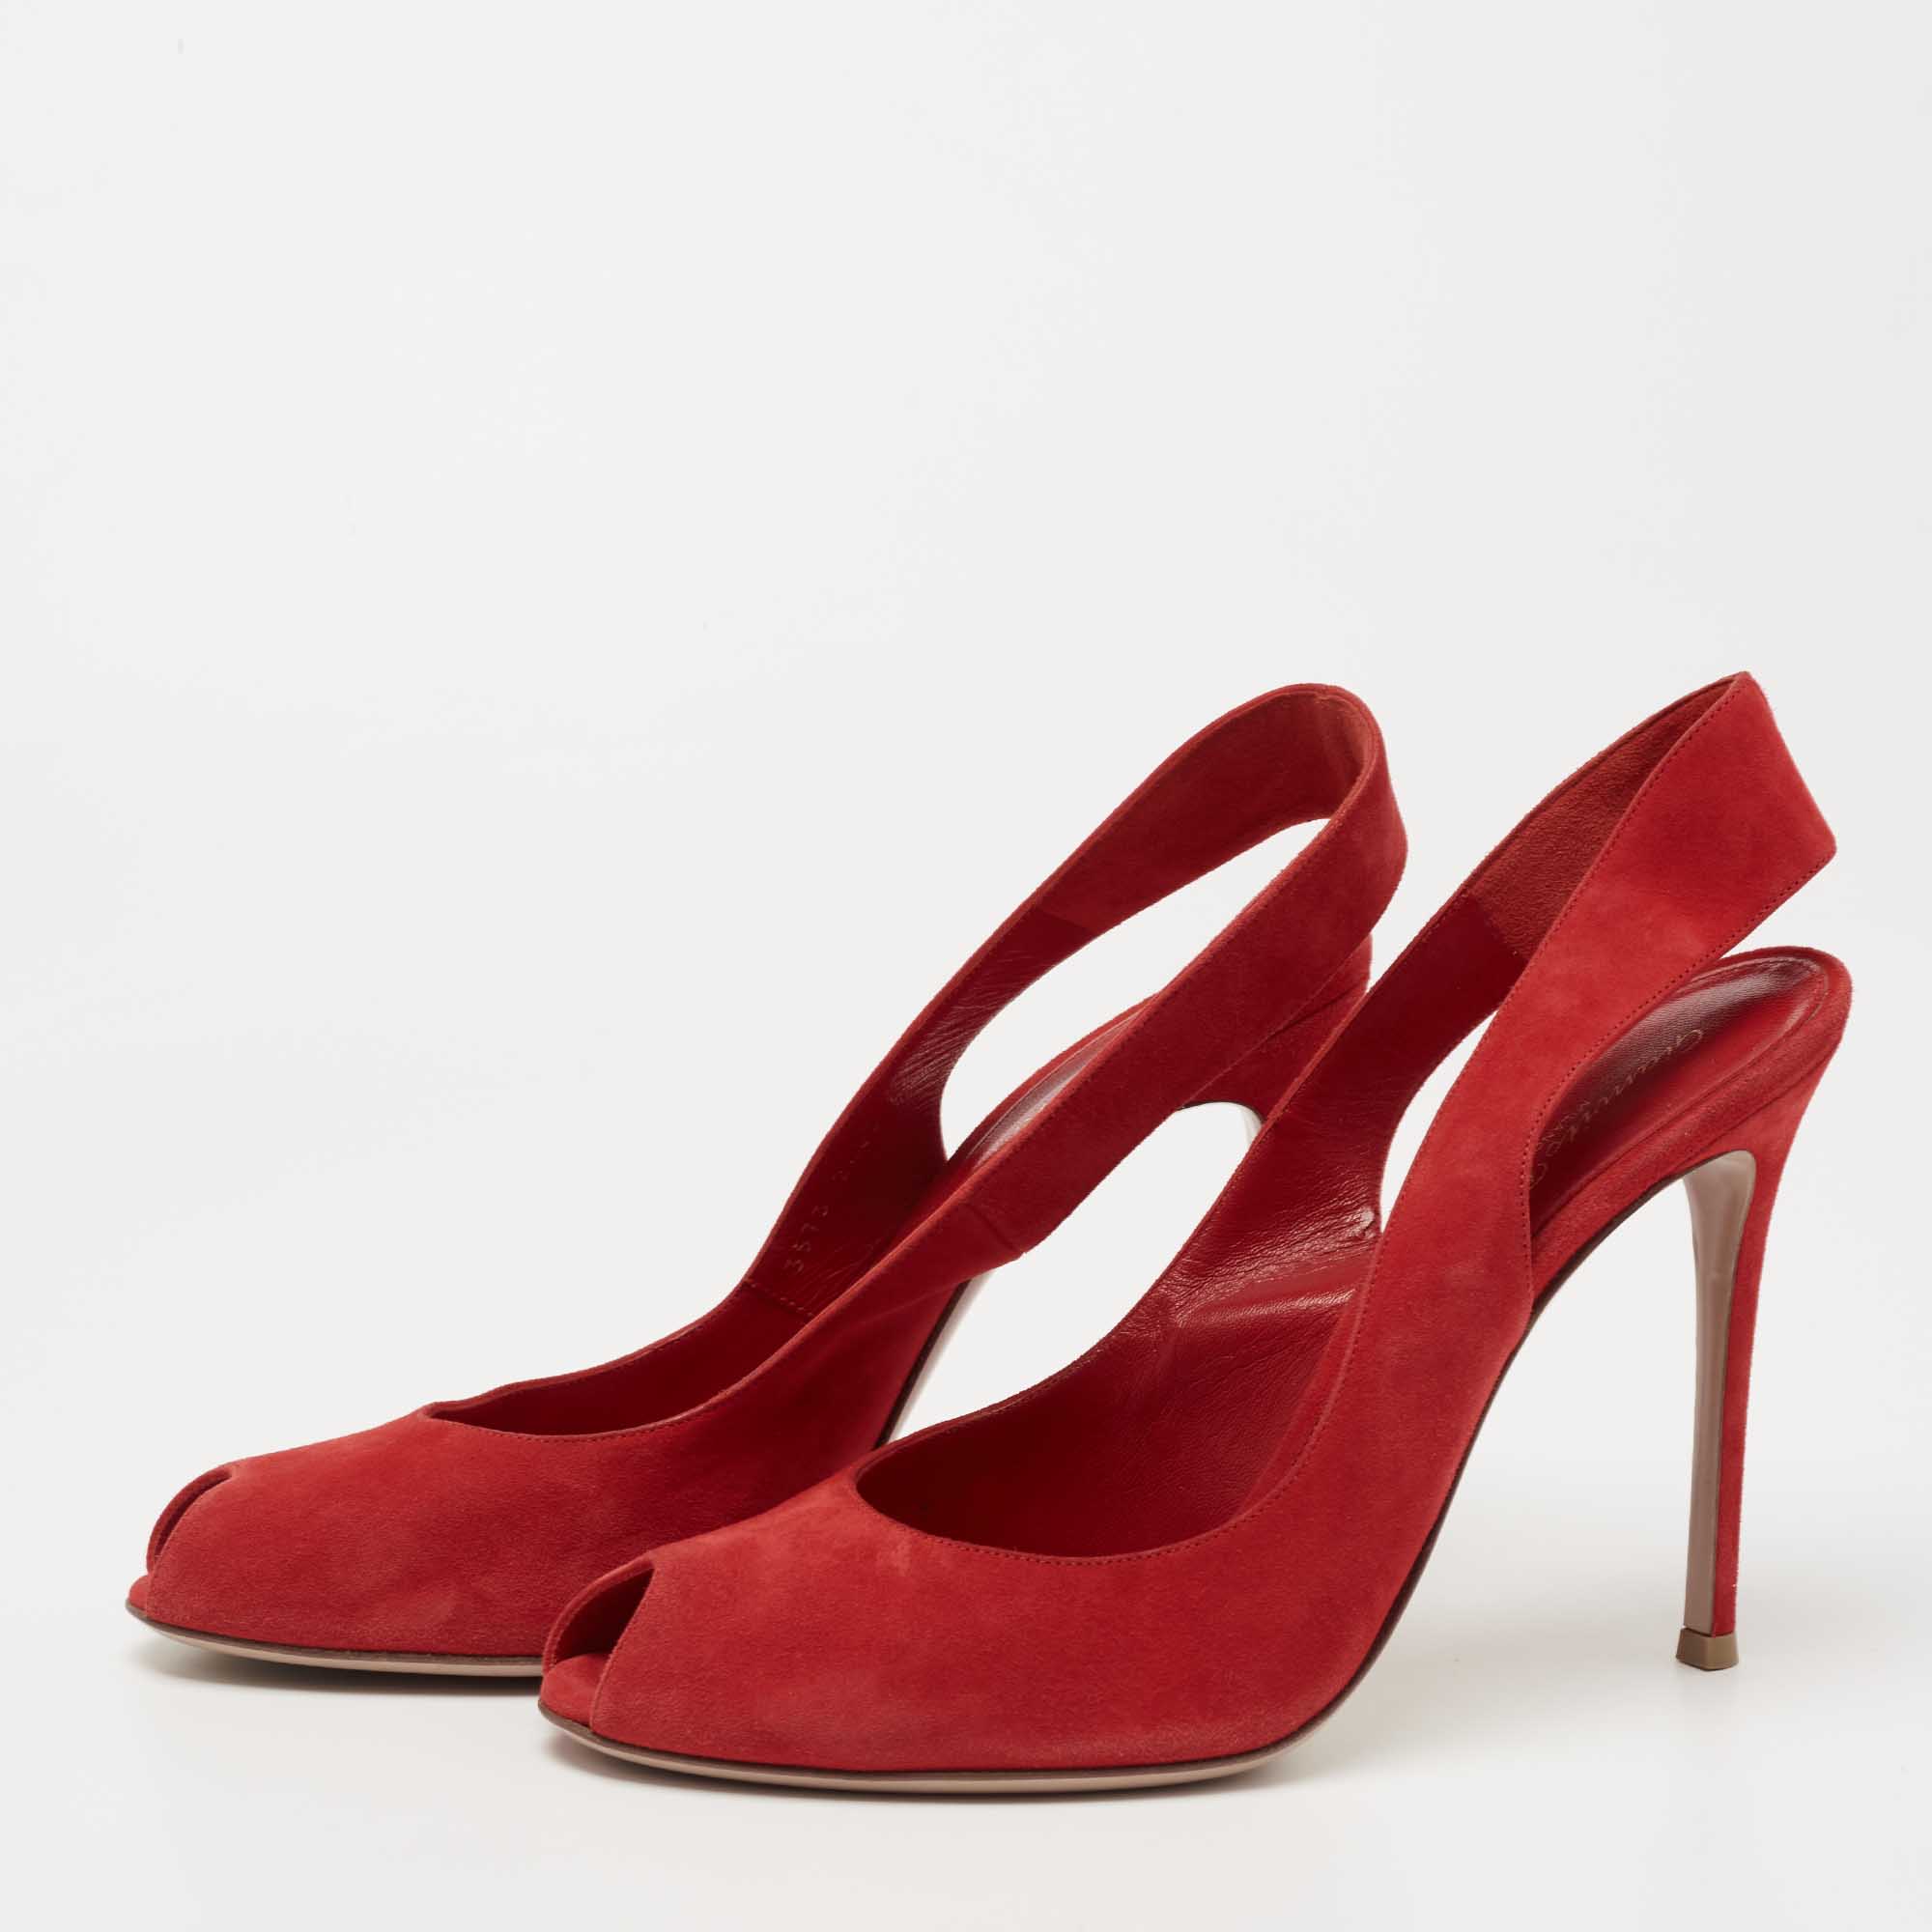 

Gianvito Rossi Red Suede Peep Toe Slingback Pumps Size